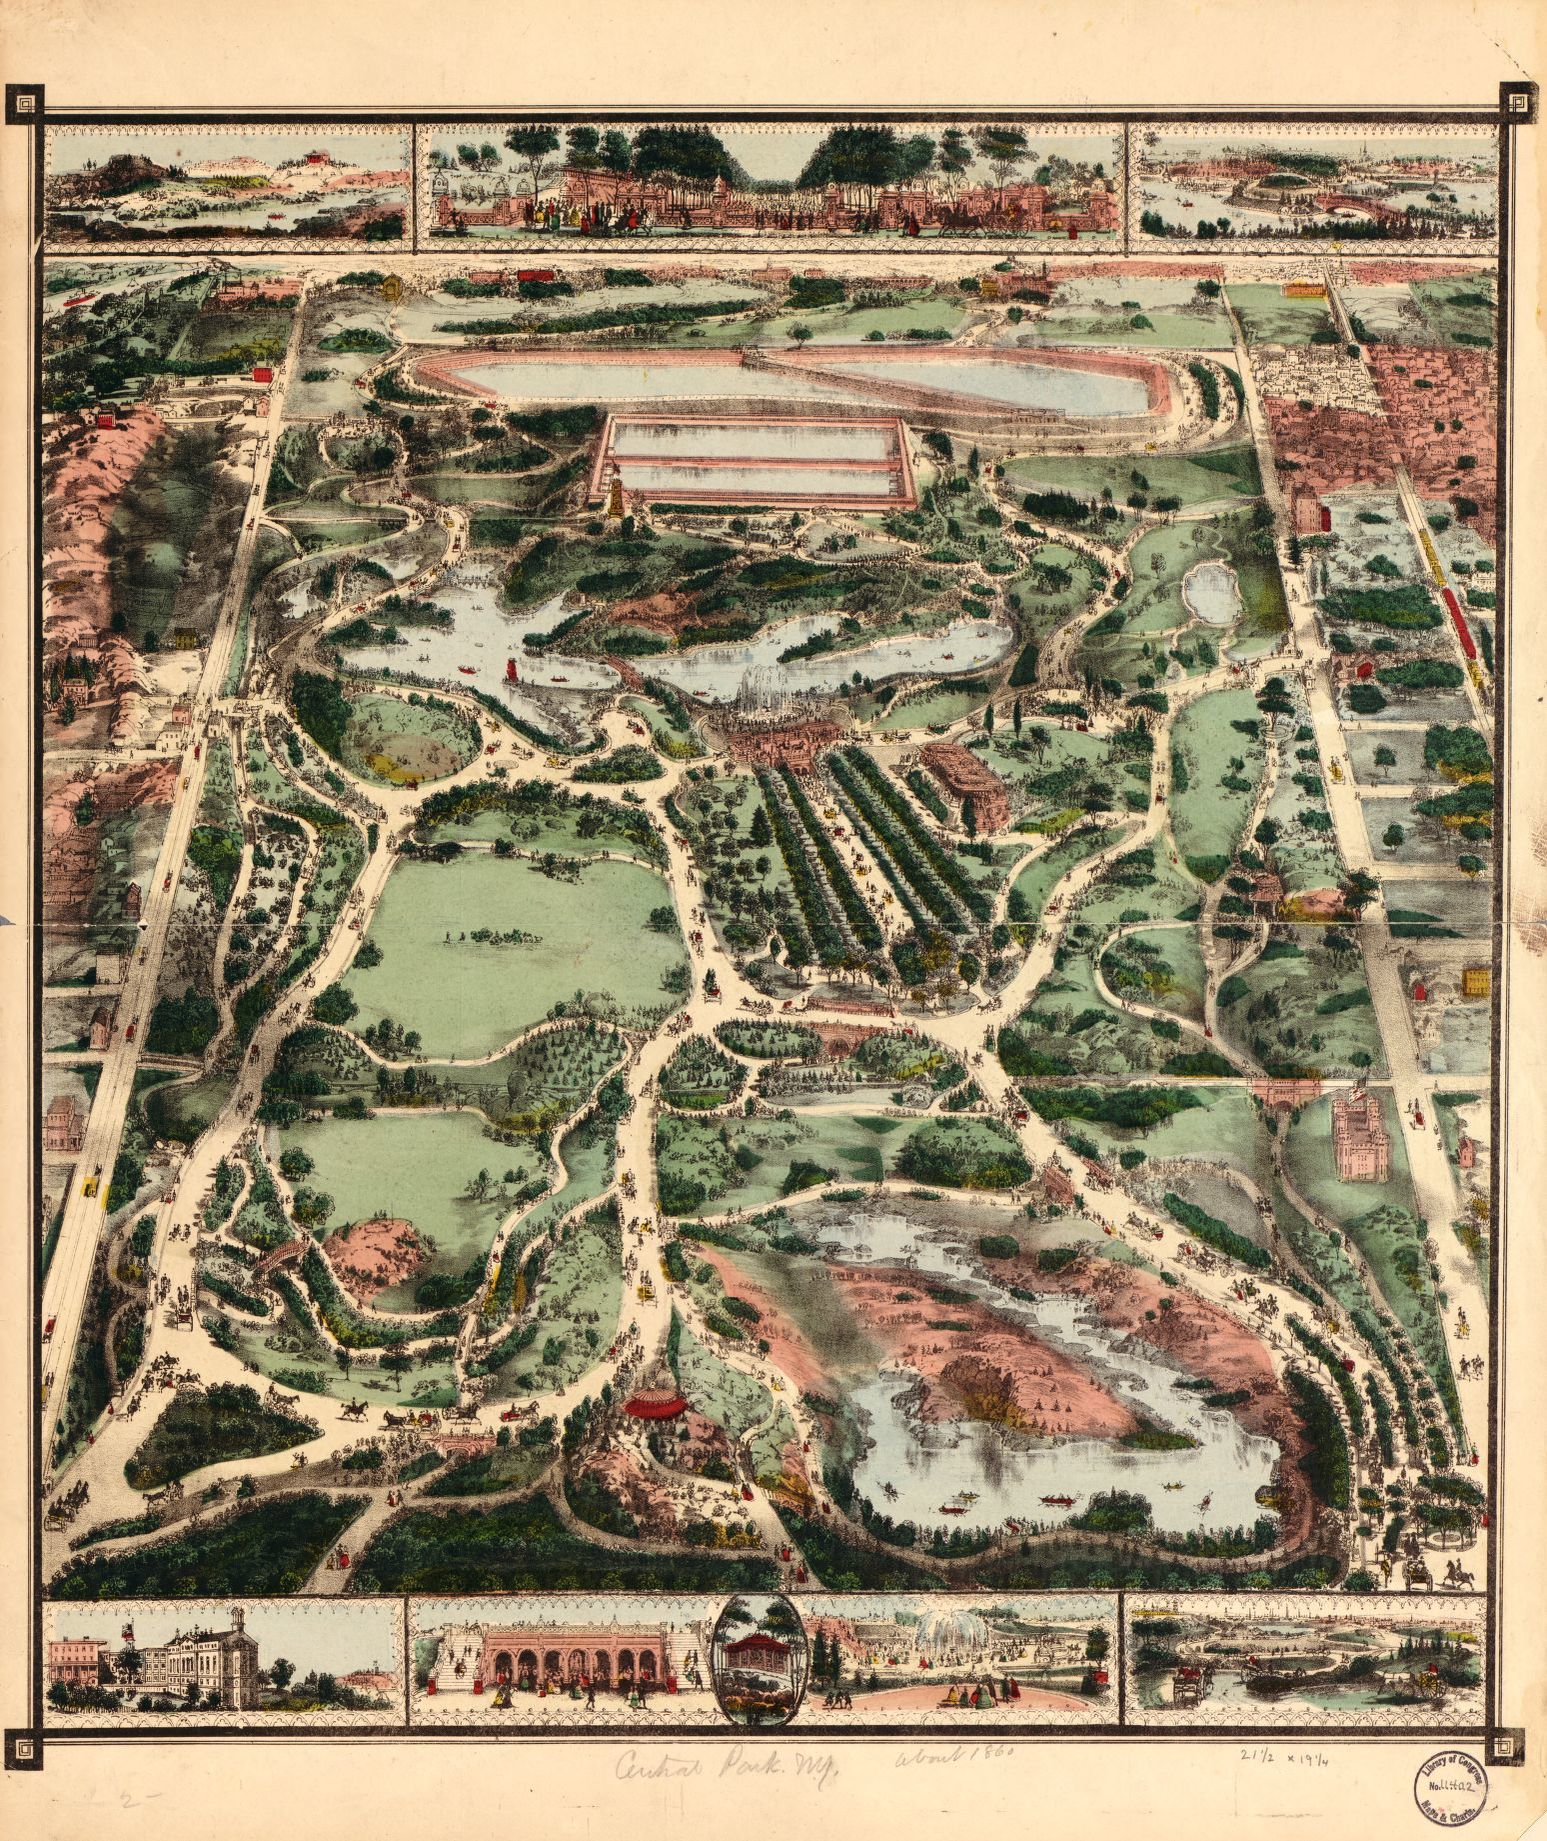 Central Park design (Image: Library of Congress)